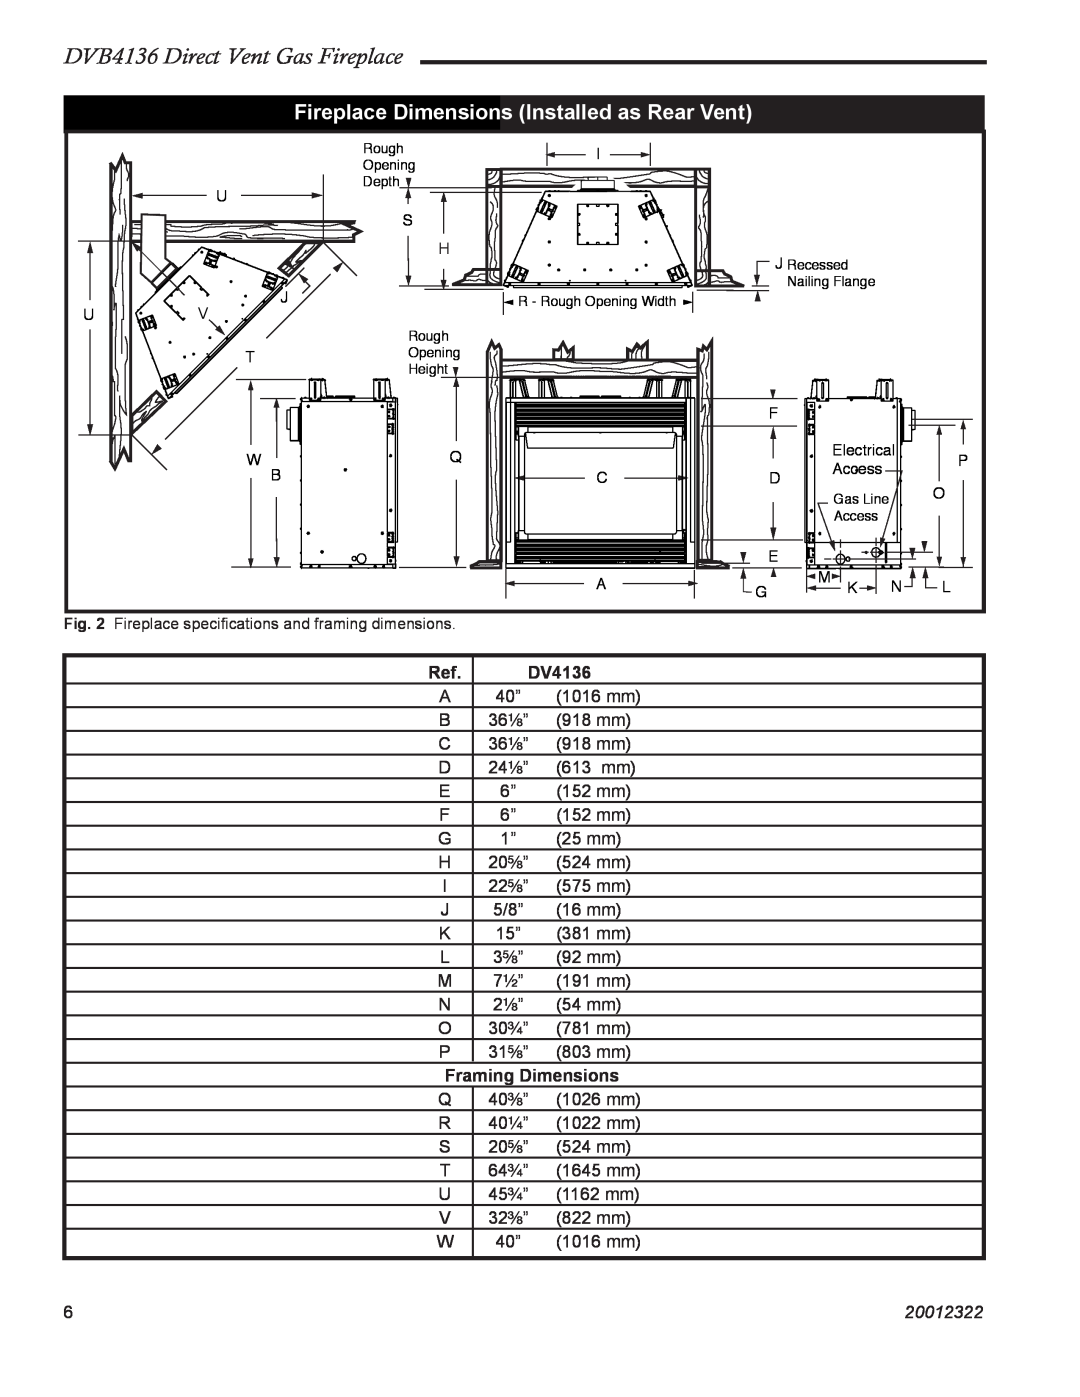 Majestic Appliances manual Fireplace Dimensions Installed as Rear Vent, DVB4136 Direct Vent Gas Fireplace, Ref. DV4136 